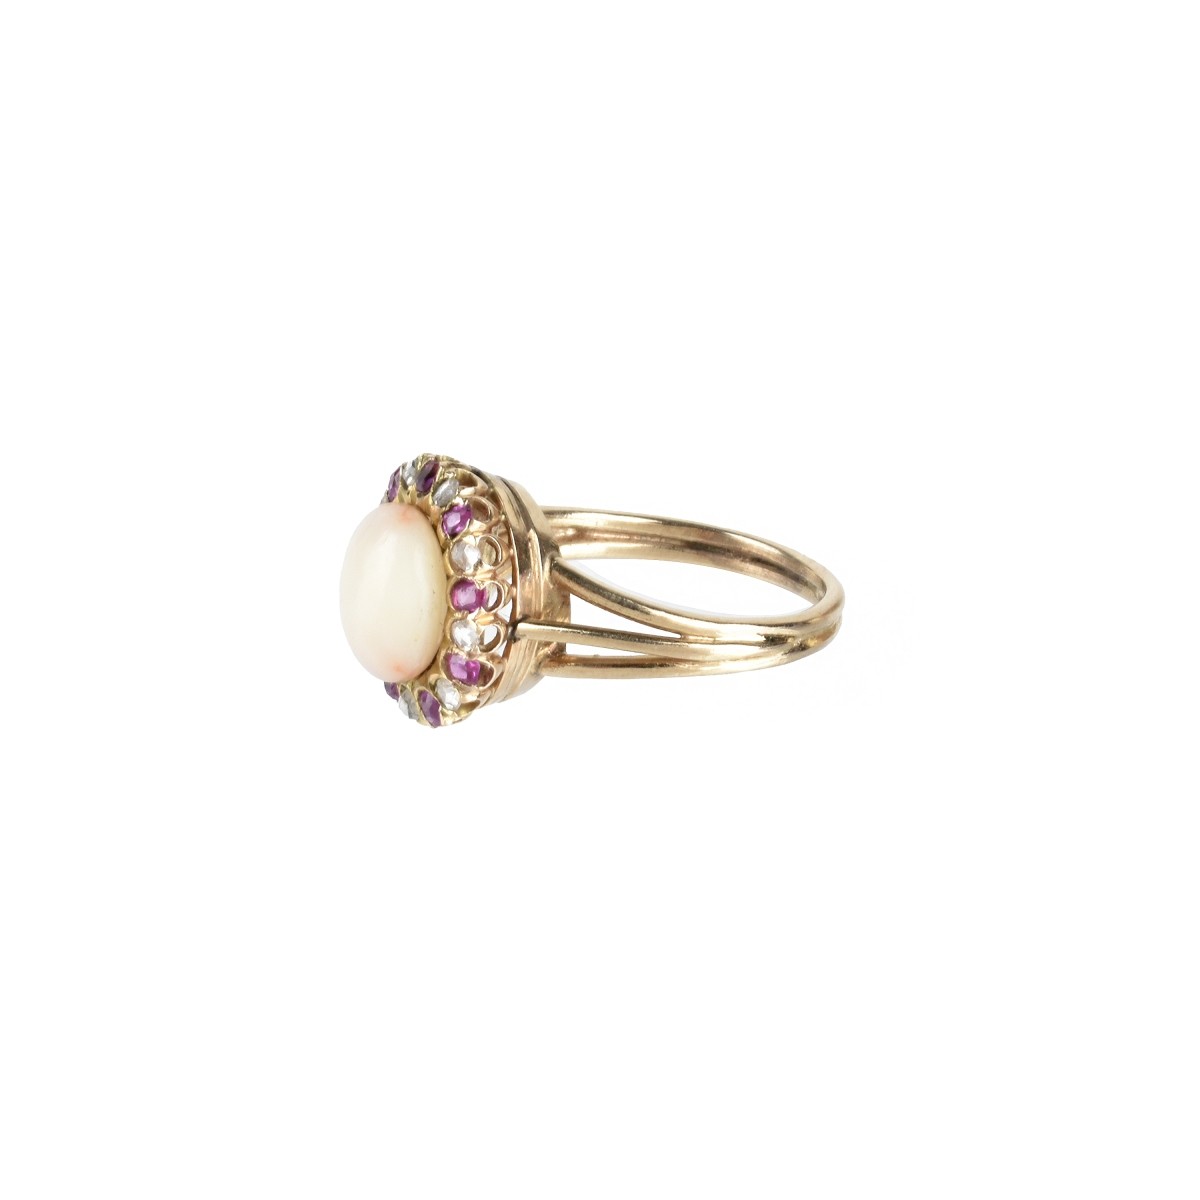 Coral, Ruby, Diamond and 14K Ring